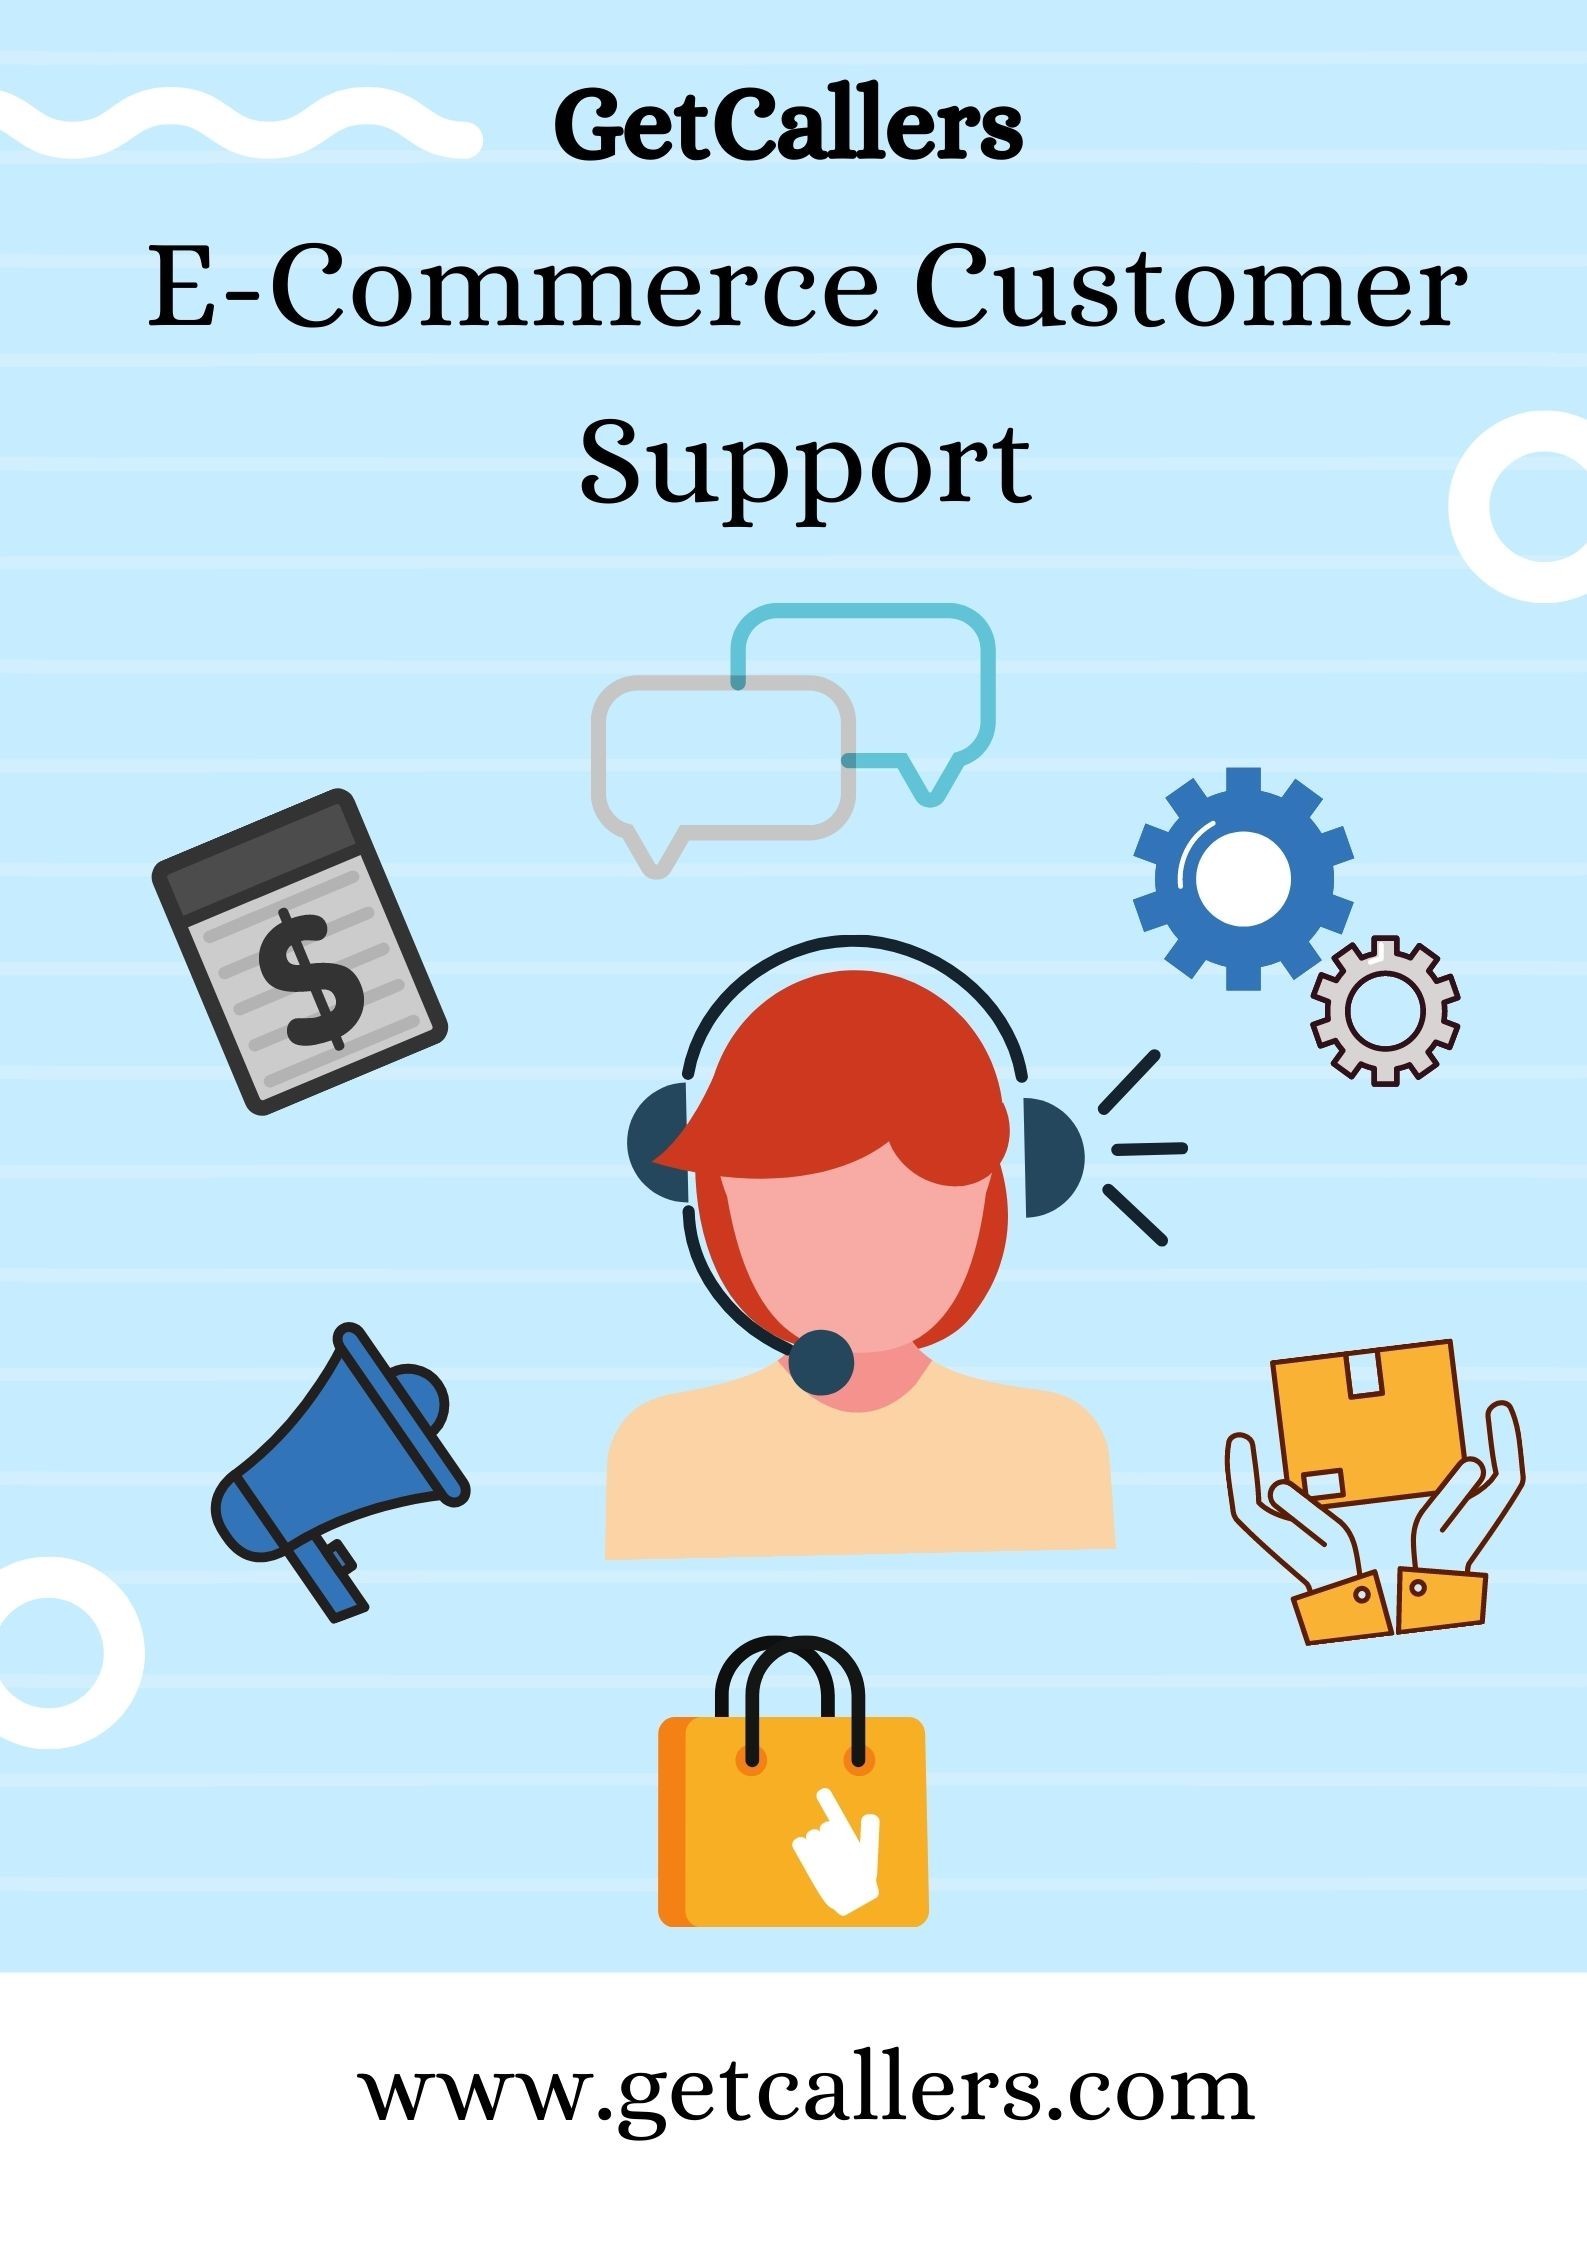 Looking For E-Commerce Customer Support Services?